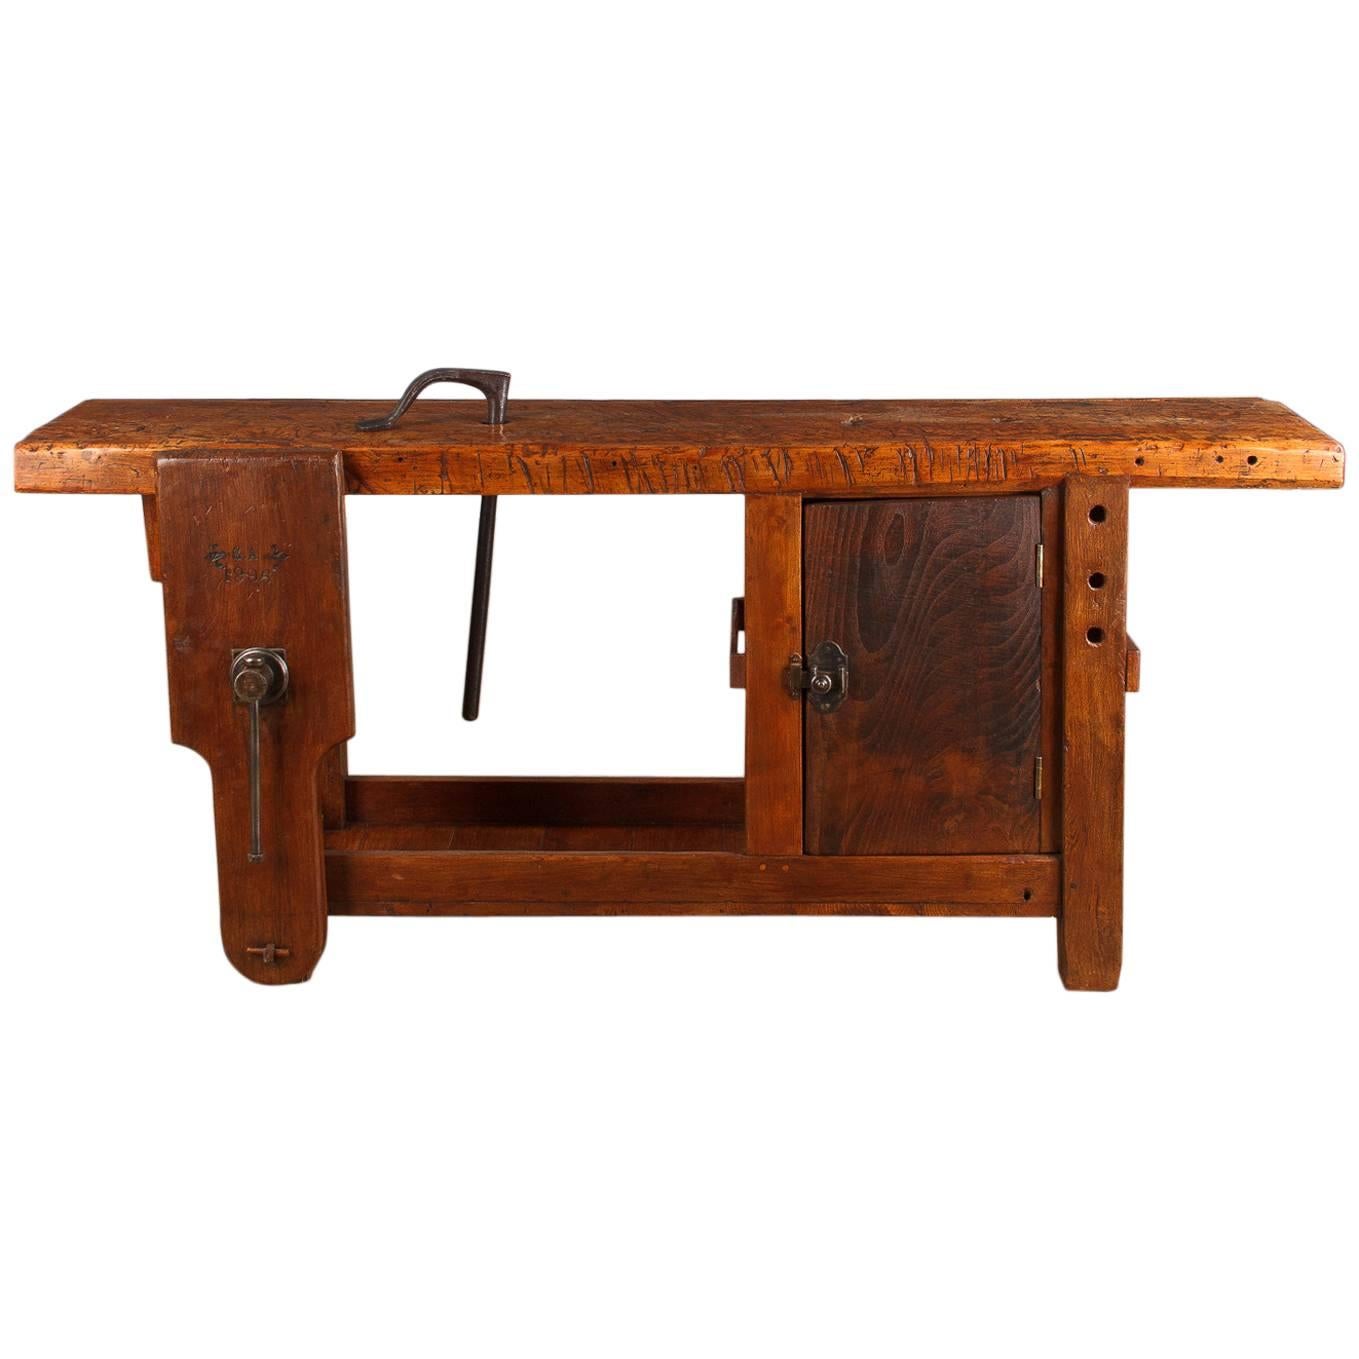 French Industrial Elm Carpenter's Workbench, Dated 1906